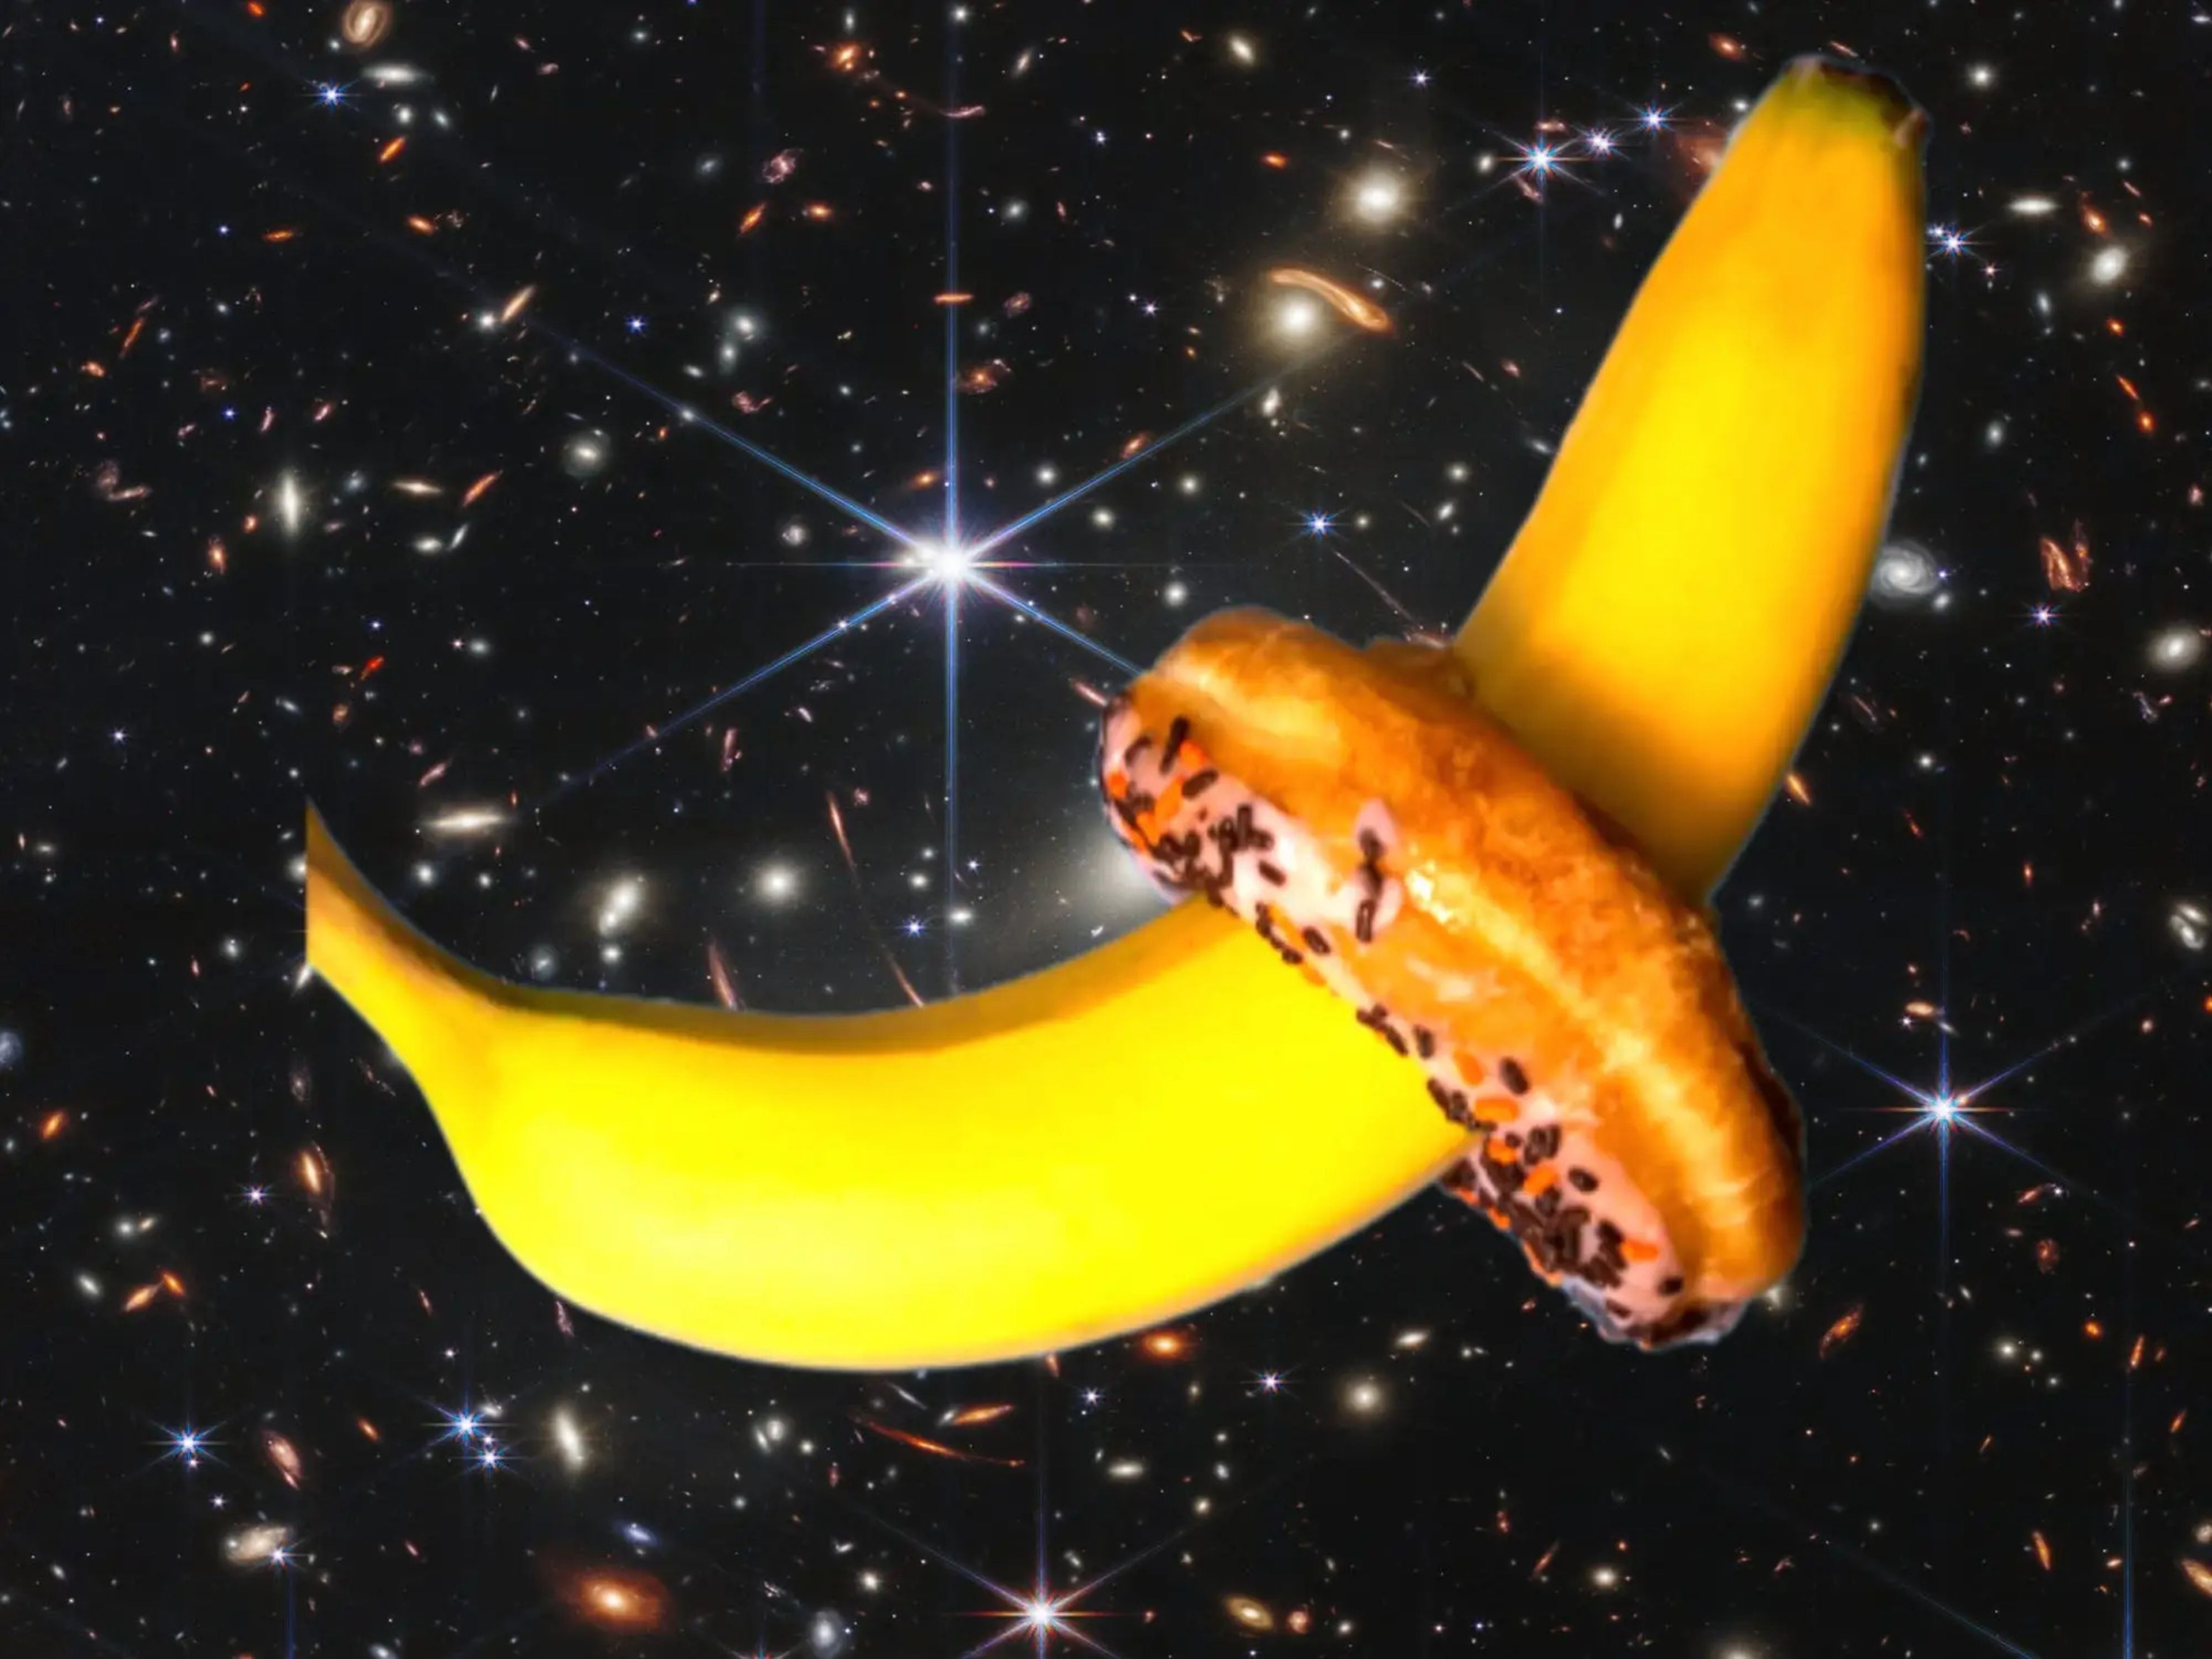 banana stuck in donut hole against starry galaxy space background